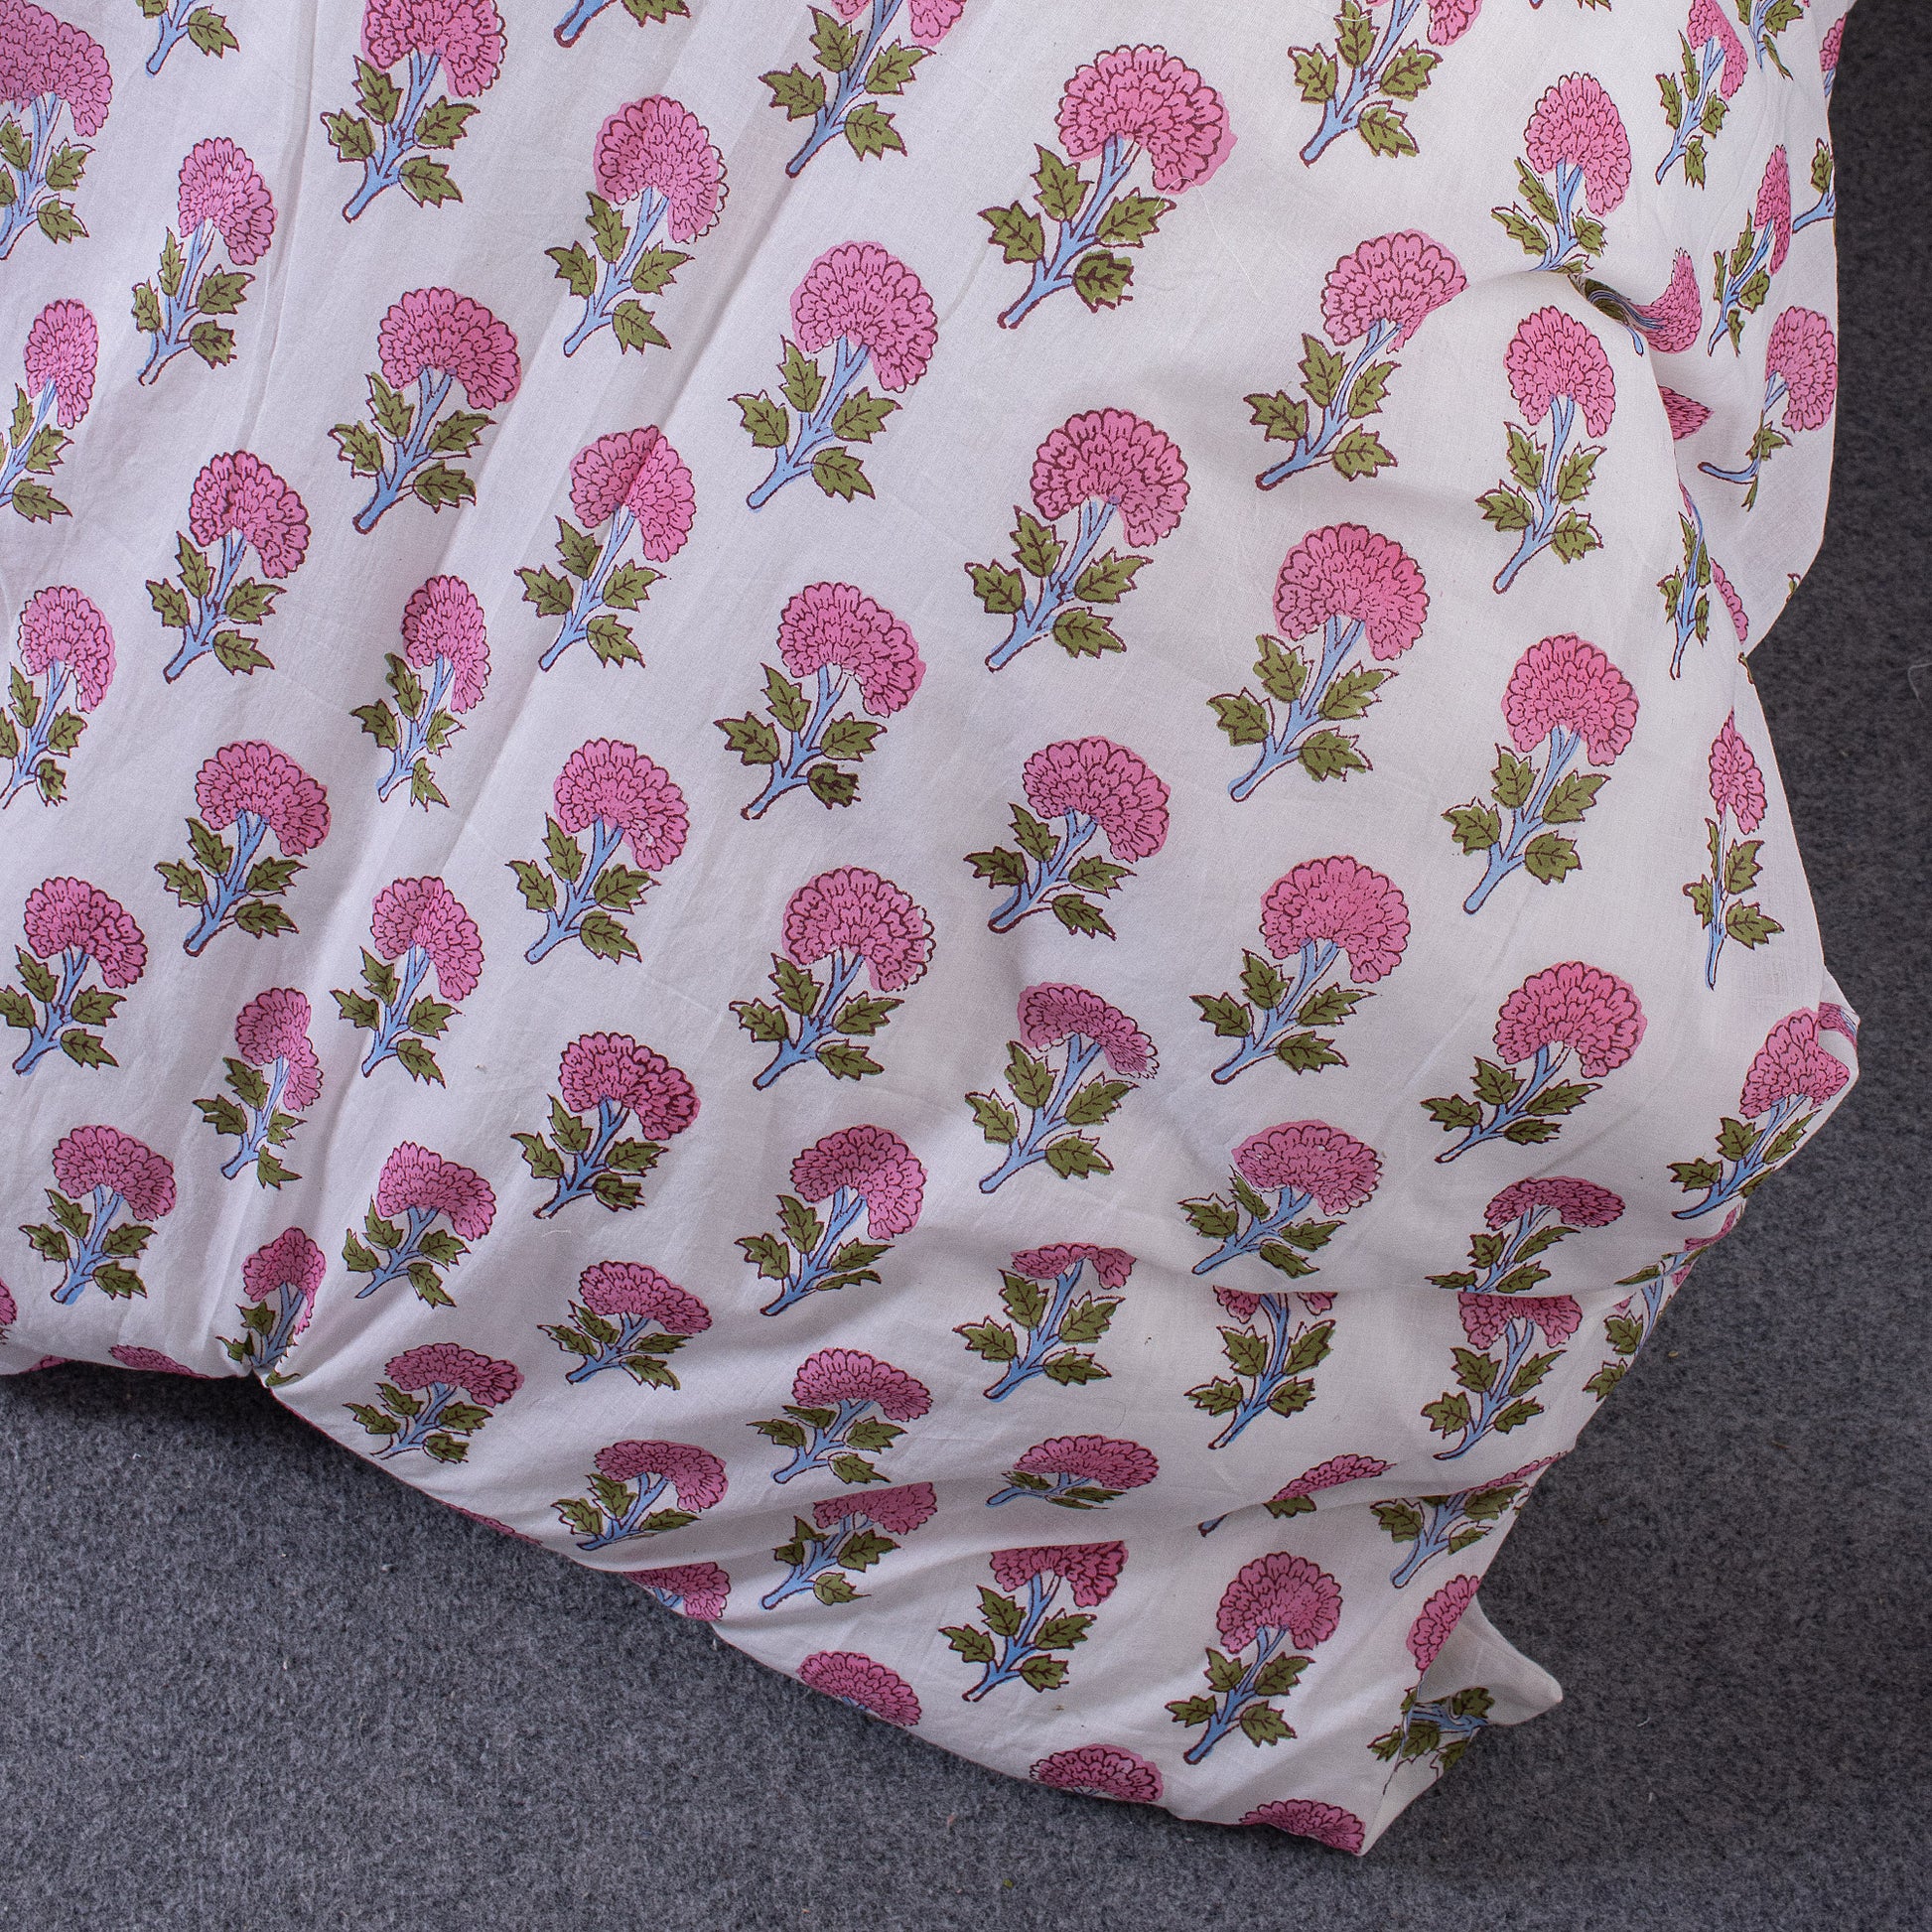 Floral Printed Double Duvet Cover With Shams